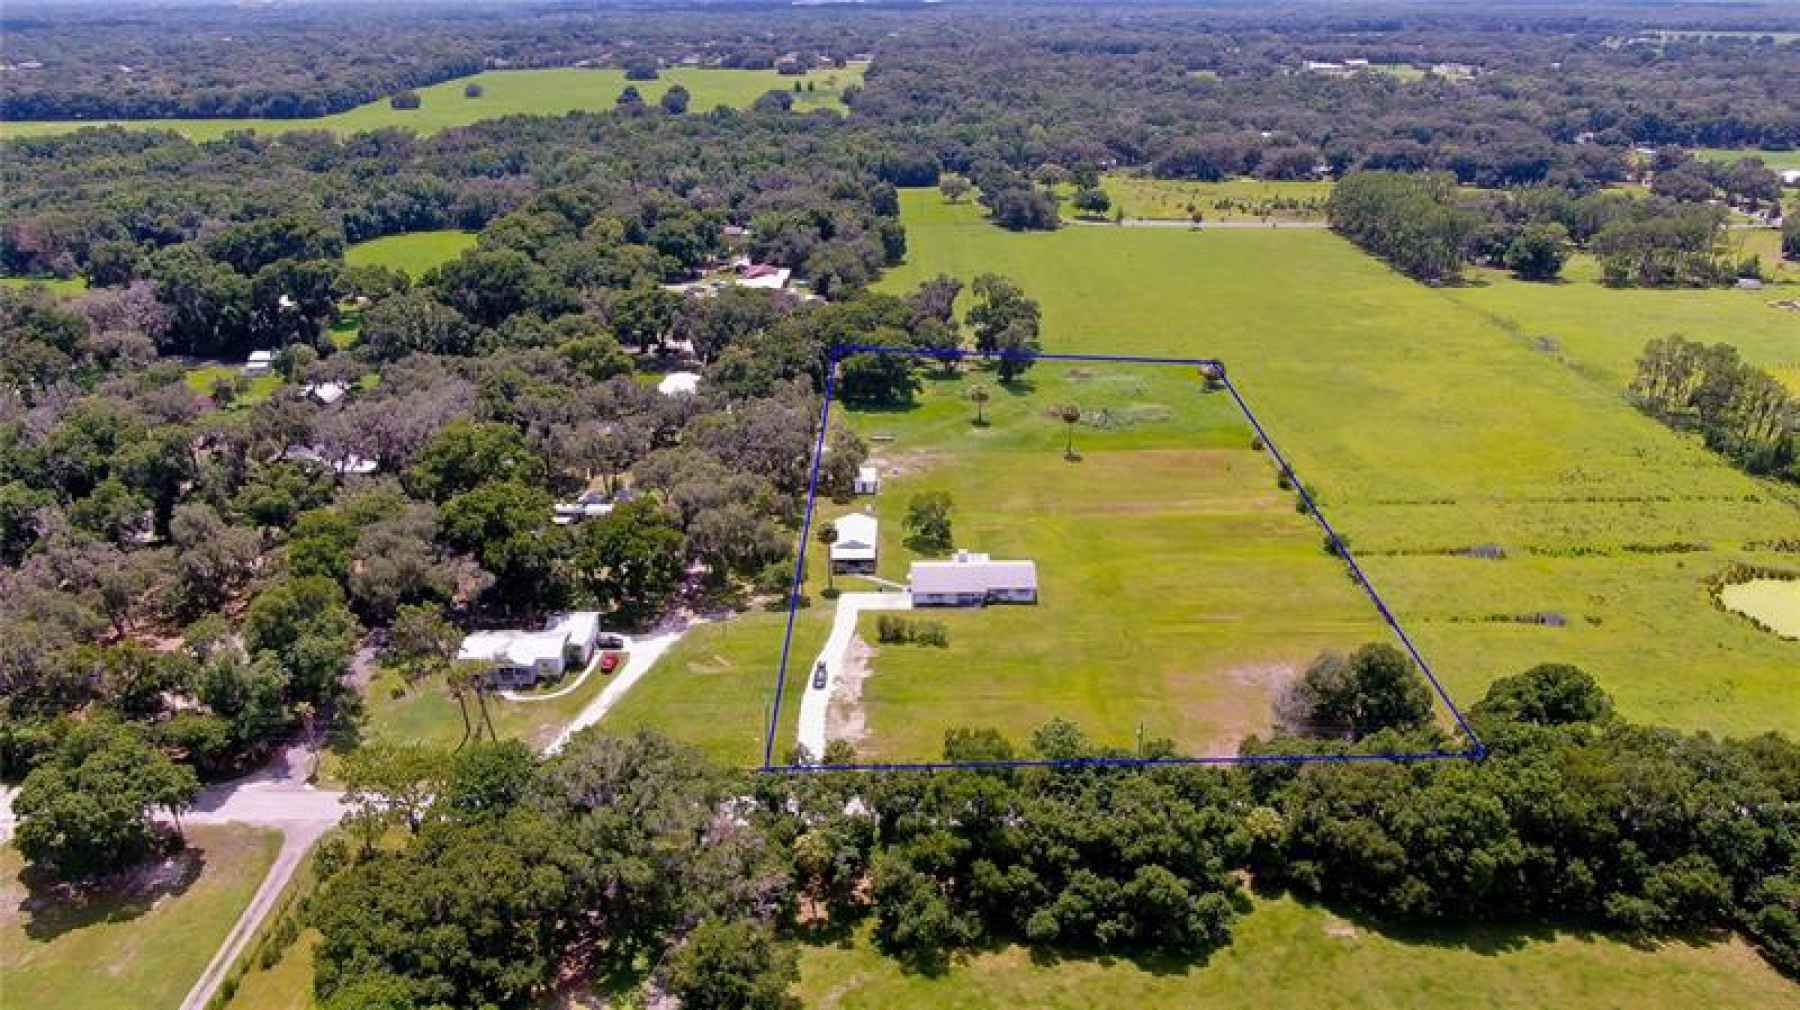 Five acres of pure bliss complete with TWO HOMES on the property!